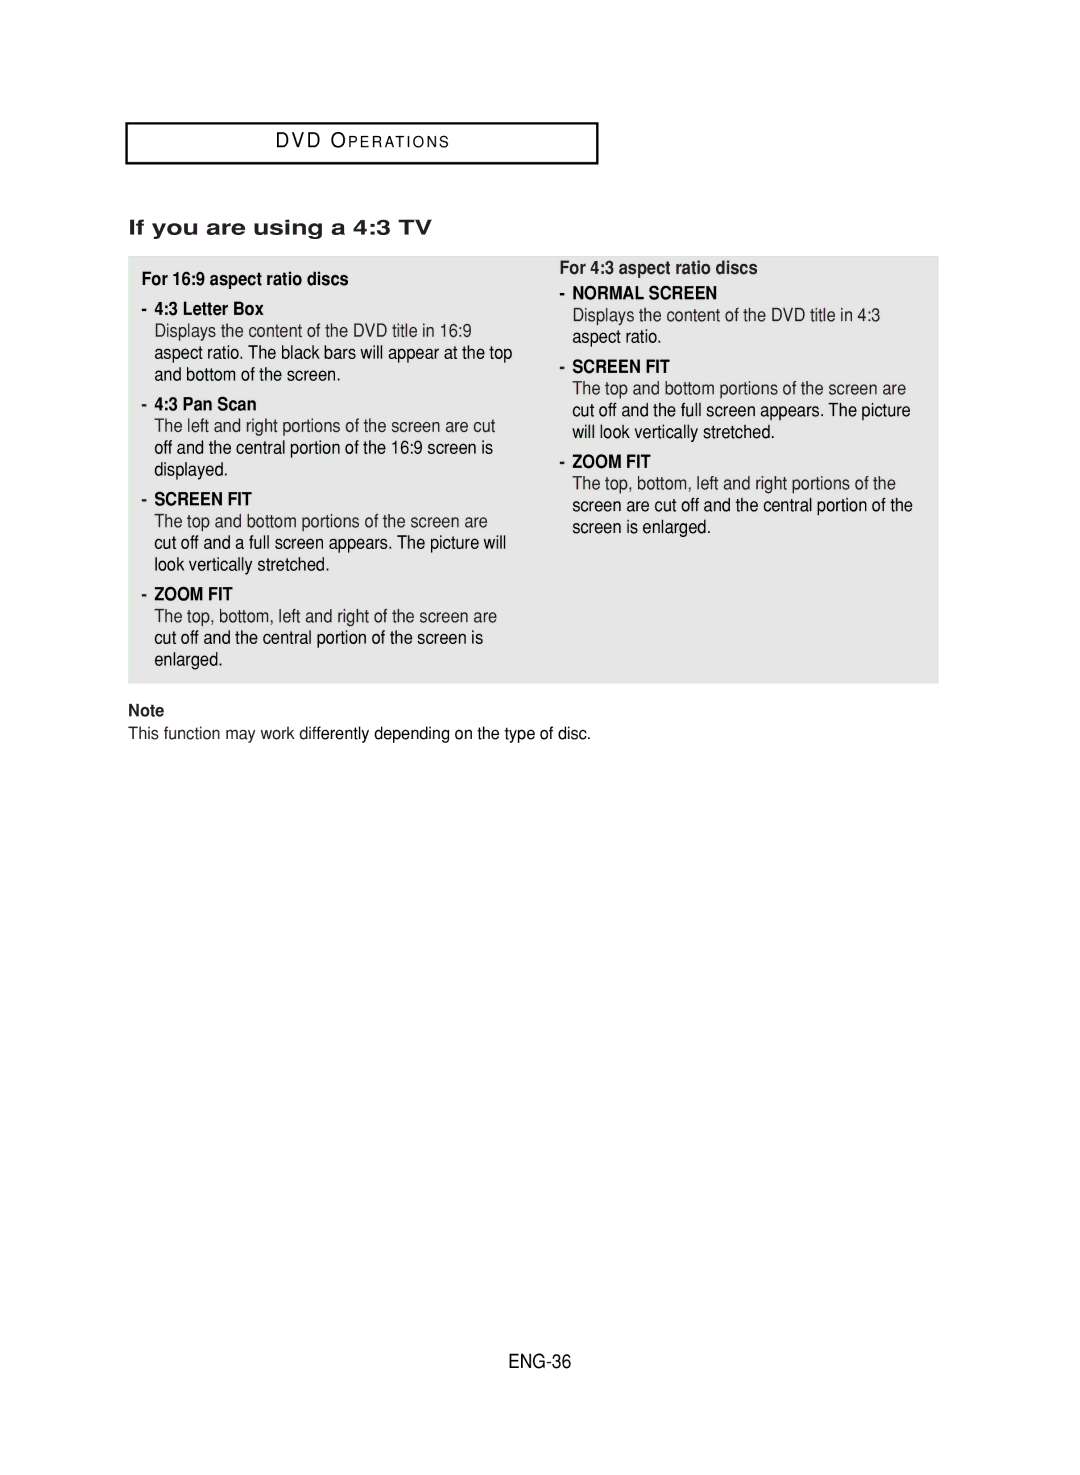 Samsung DVD-V9800 instruction manual If you are using a 43 TV, ENG-36, For 169 aspect ratio discs Letter Box, Pan Scan 